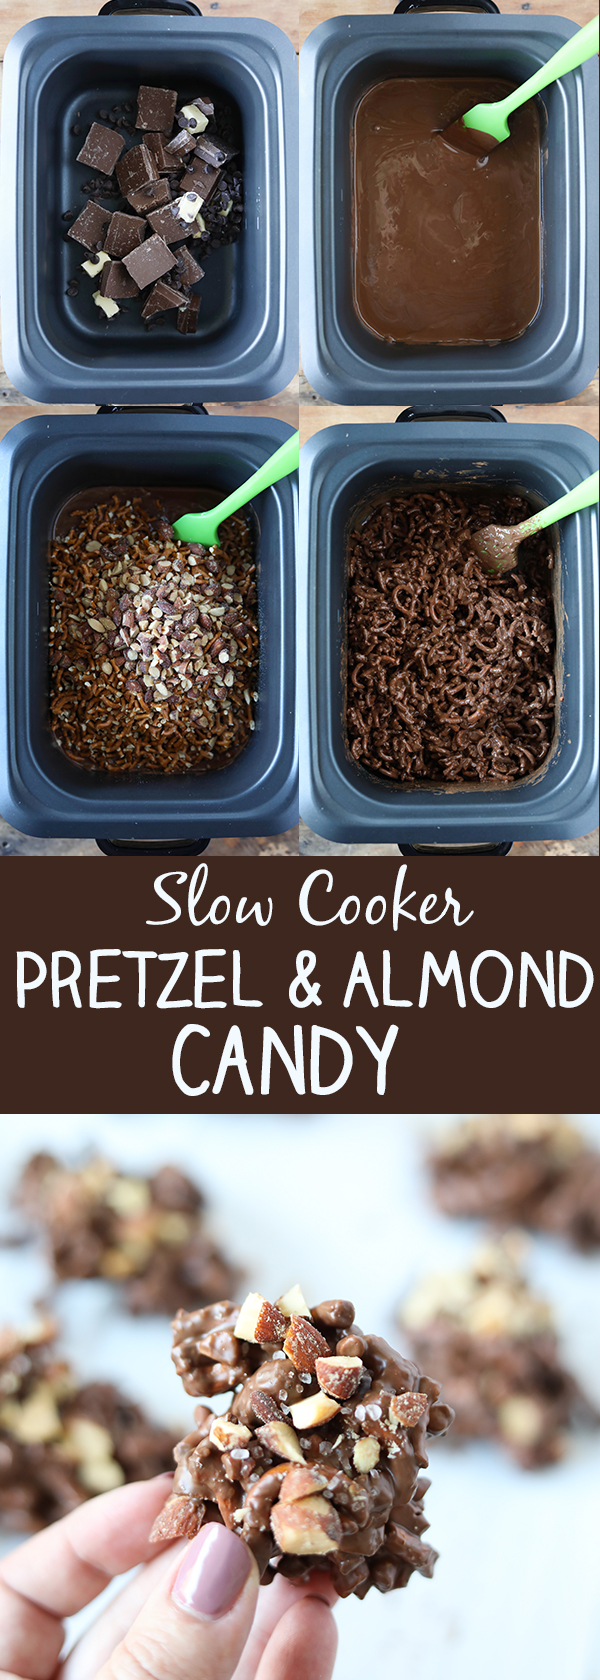 Slow Cooker Pretzel and Smoked Almond Candy